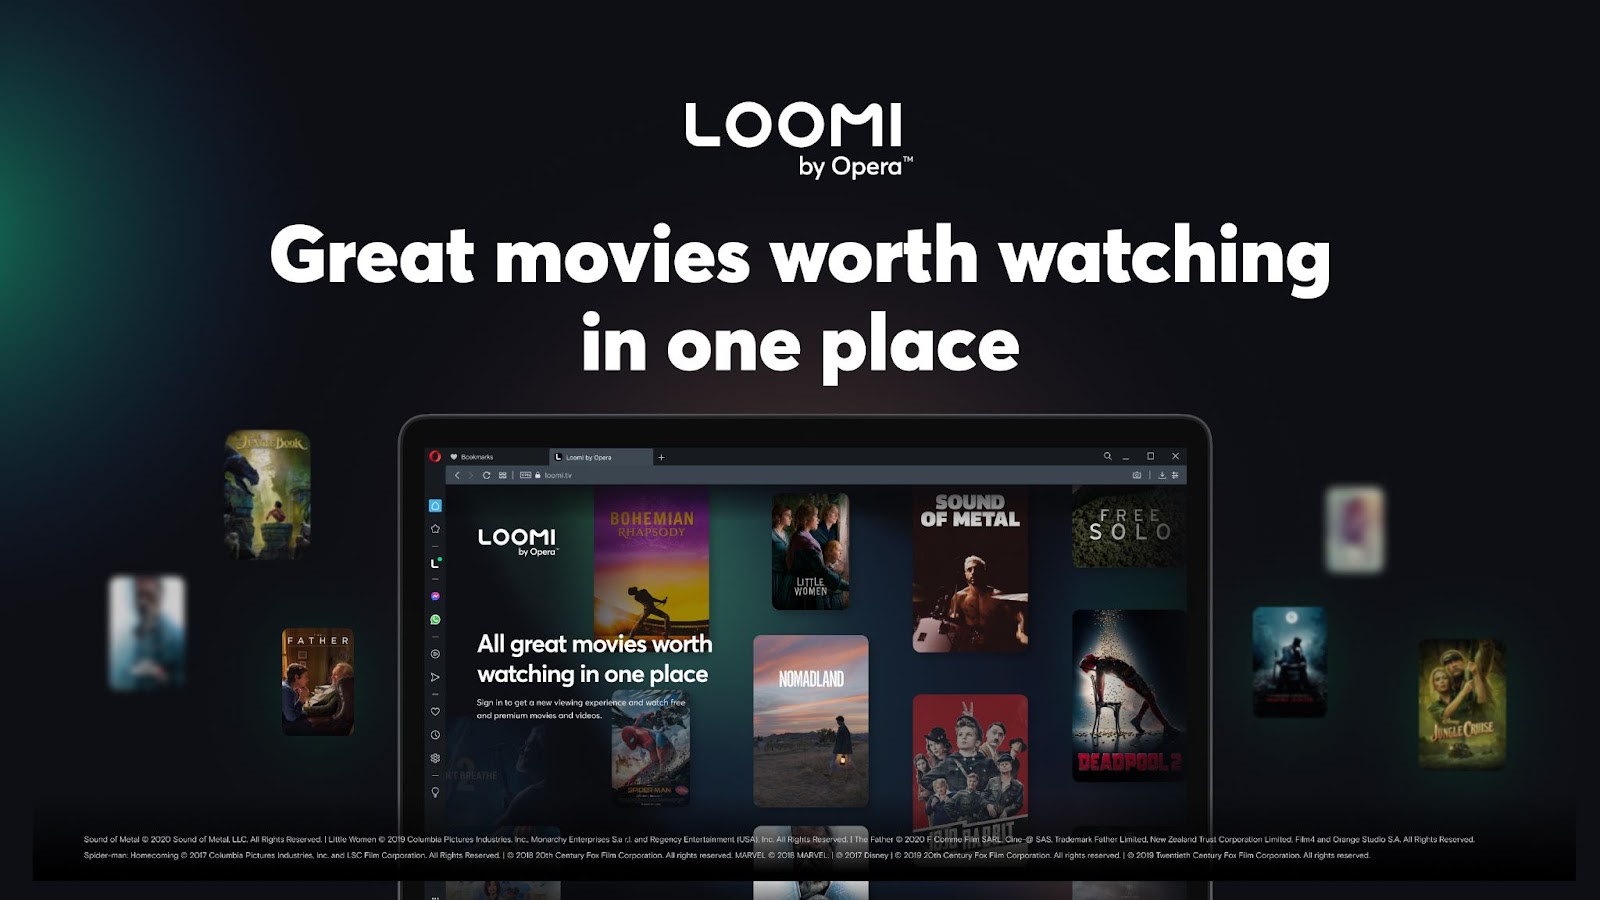 Opera is reinventing how people watch movies, launching a public beta of its new VOD platform, Loomi